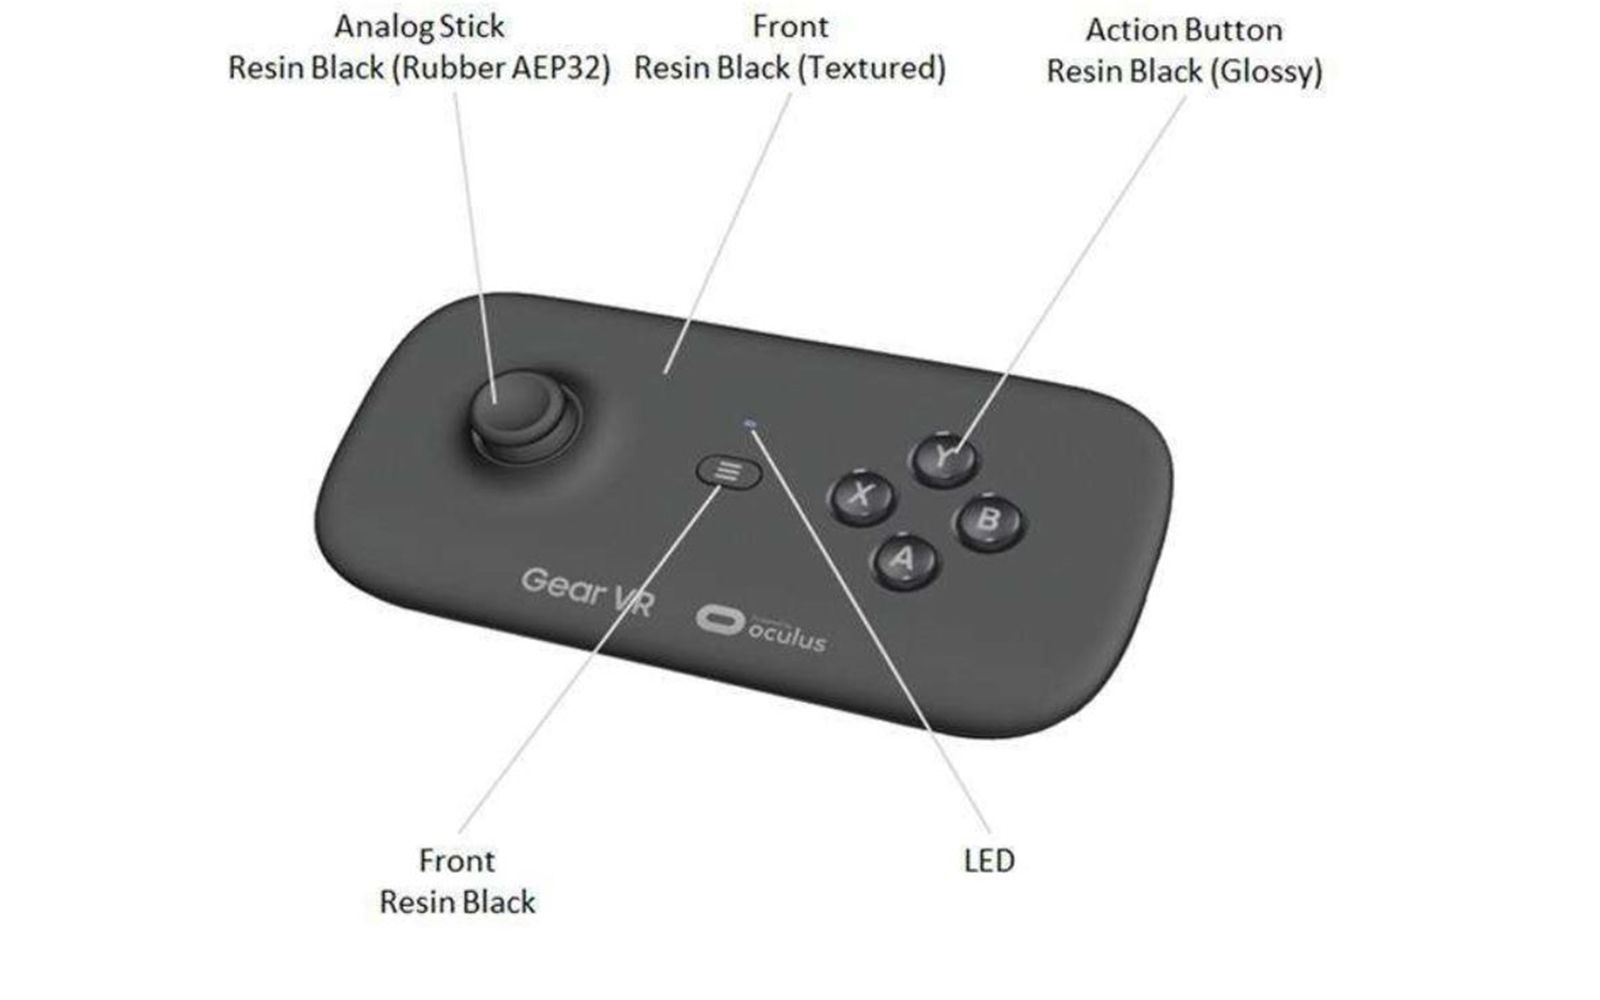 samsung gear vr getting its own gamepad clips into headset when not in use image 2